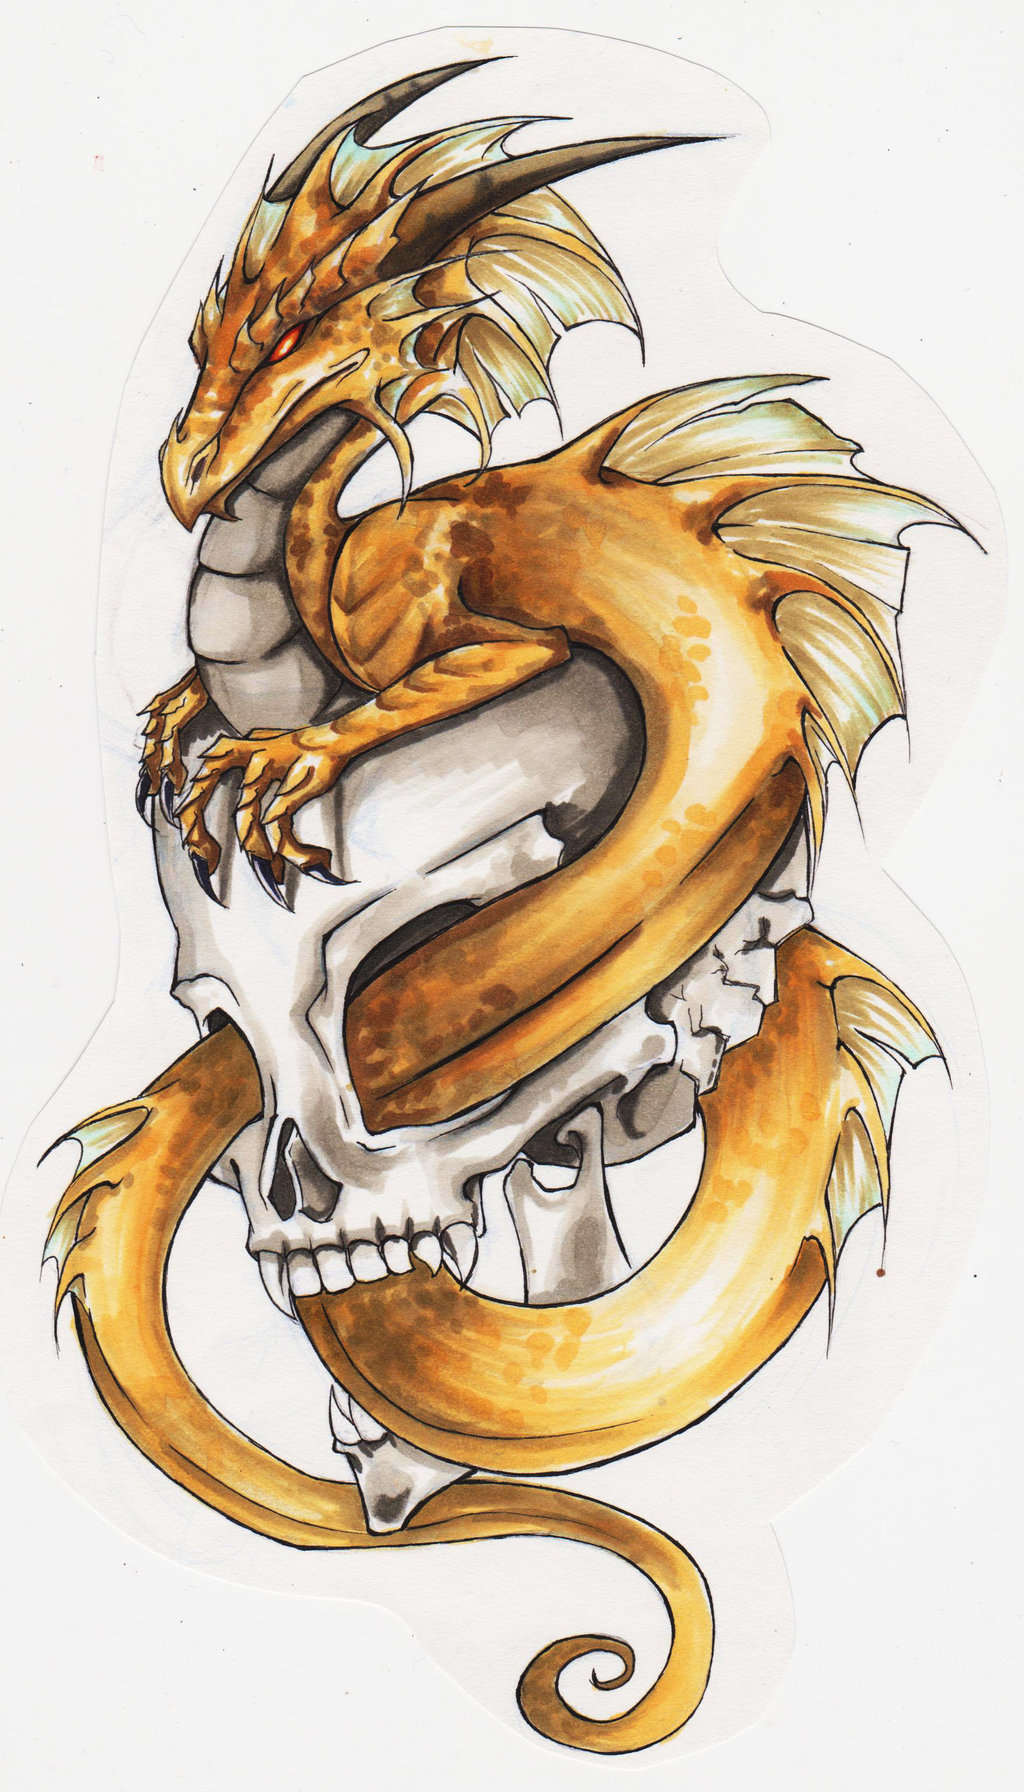 Awesome Dragon and Skull Tattoo Design